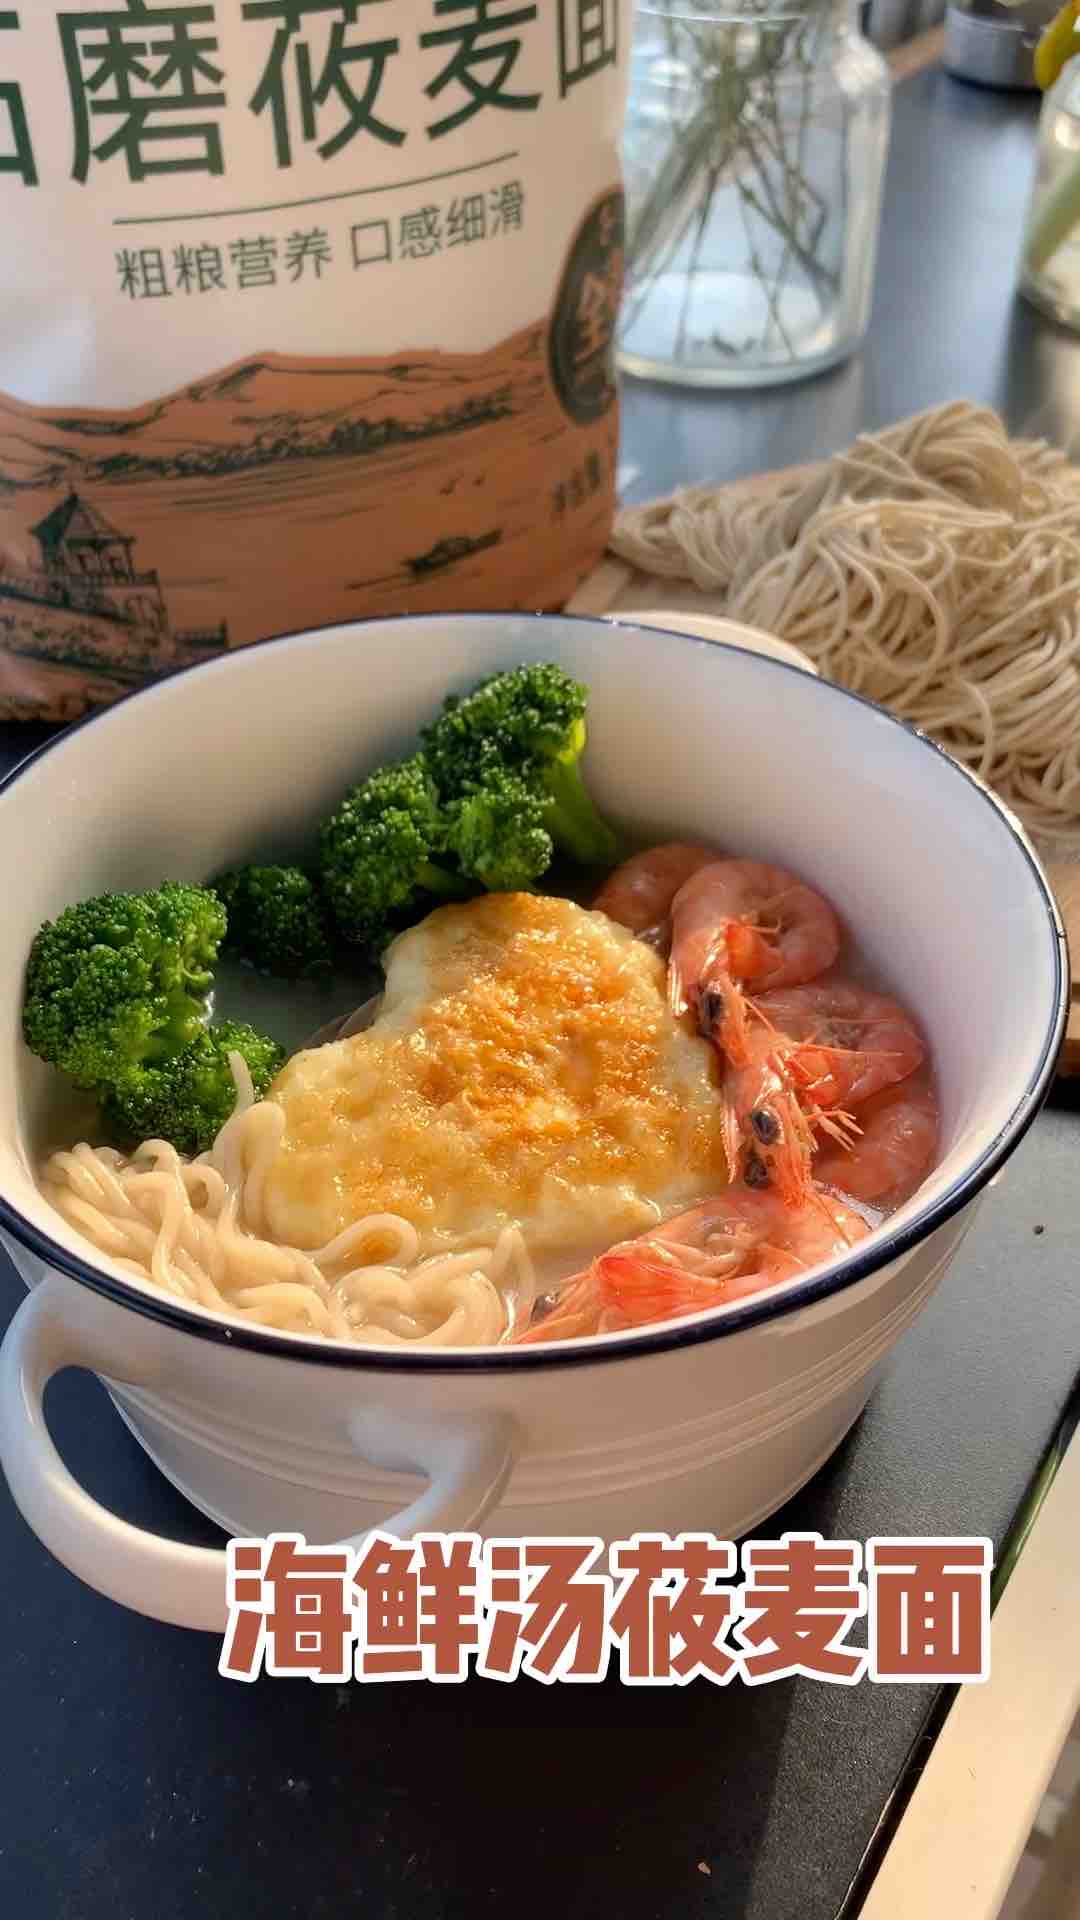 Naked Oat Noodles in Seafood Soup recipe